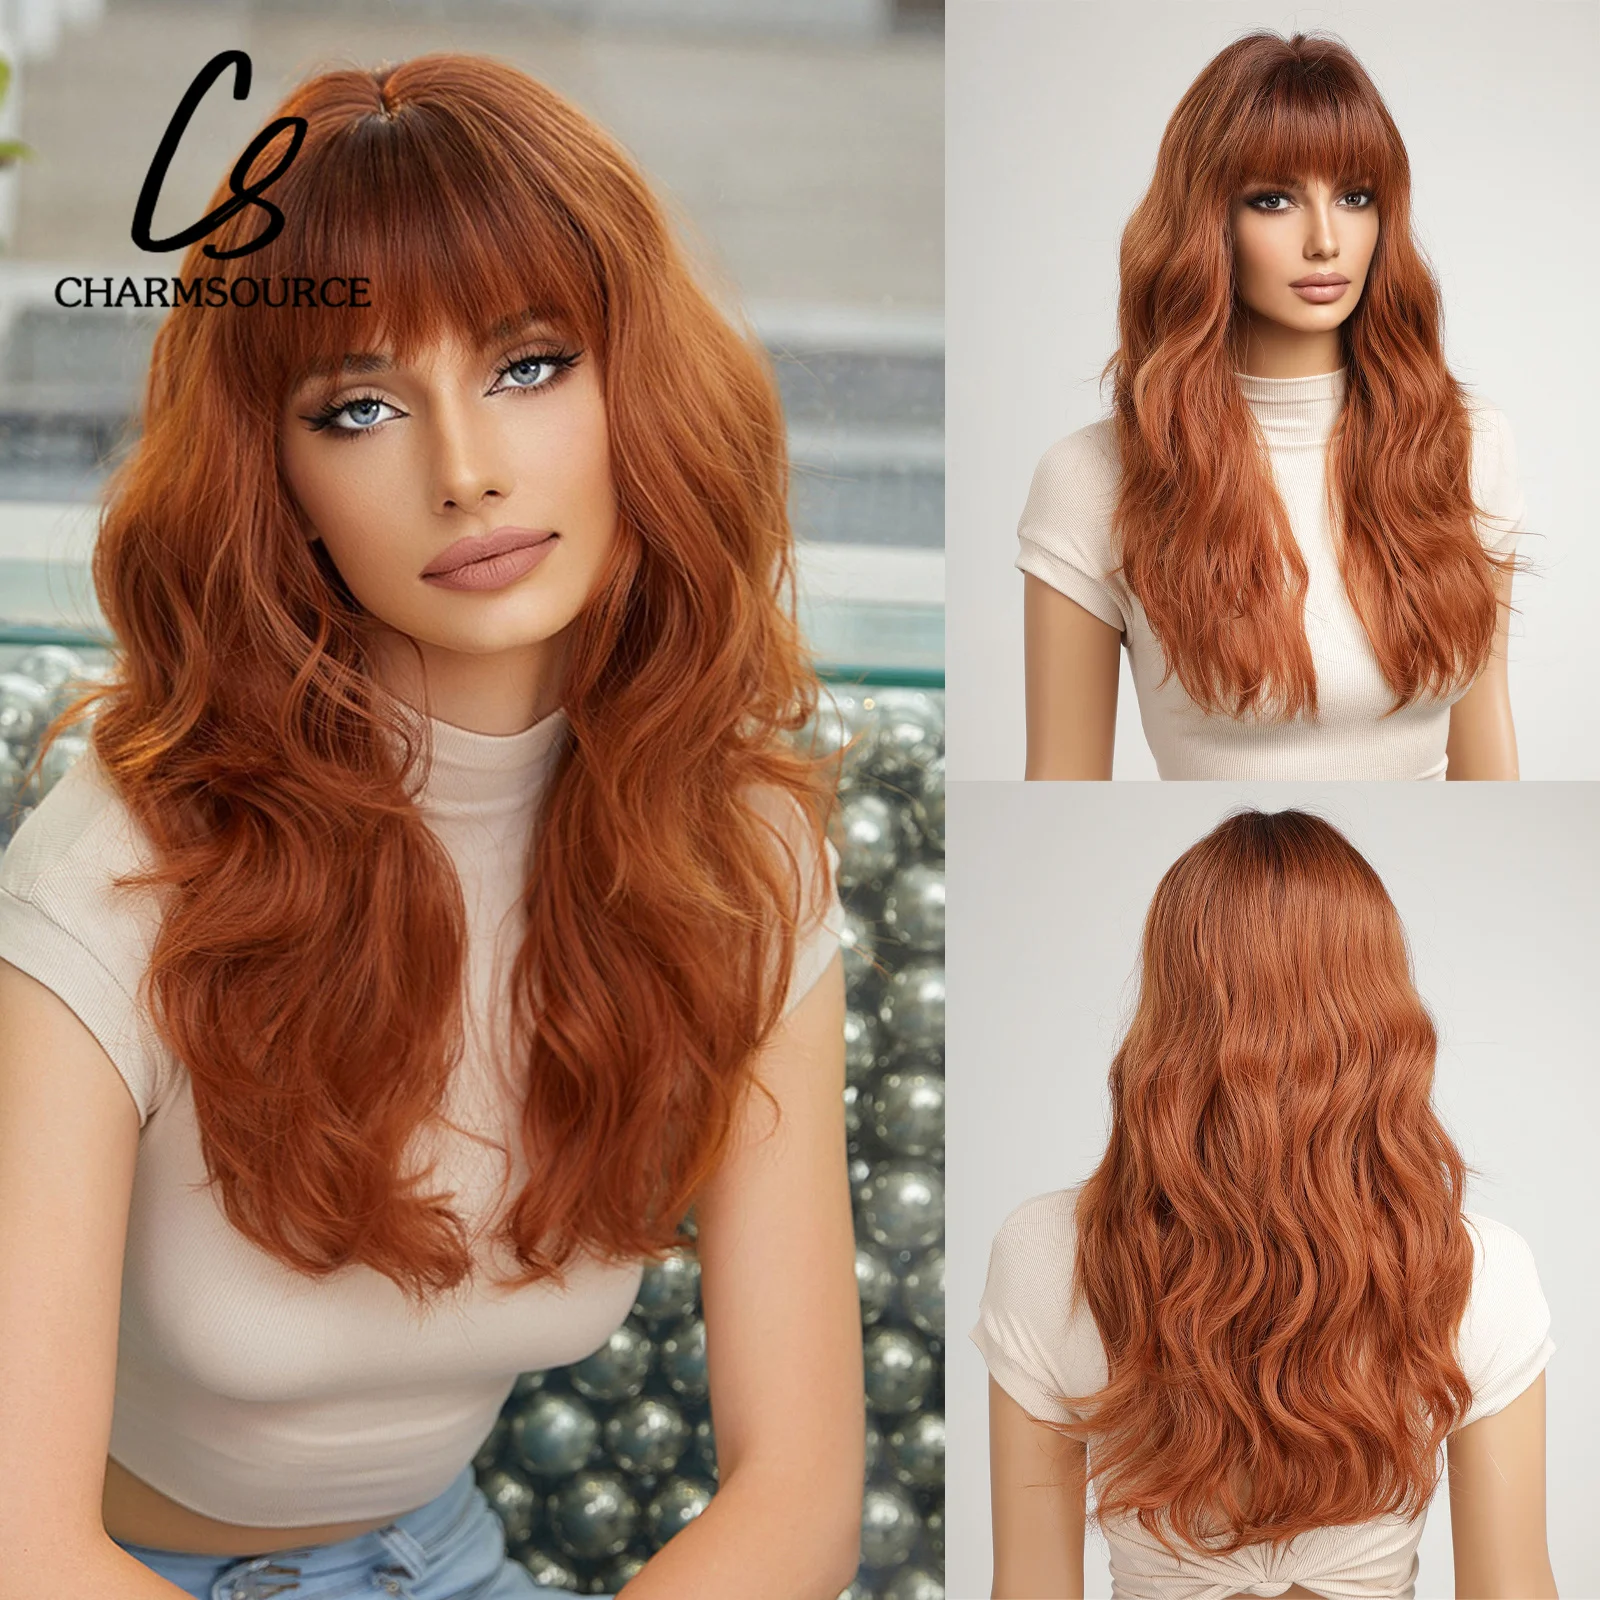 CharmSource Orange Copper Yellow Synthetic Wigs Long Wavy Wig with Bangs for Women Natural Cosplay Body Wave Heat Resistant Hair